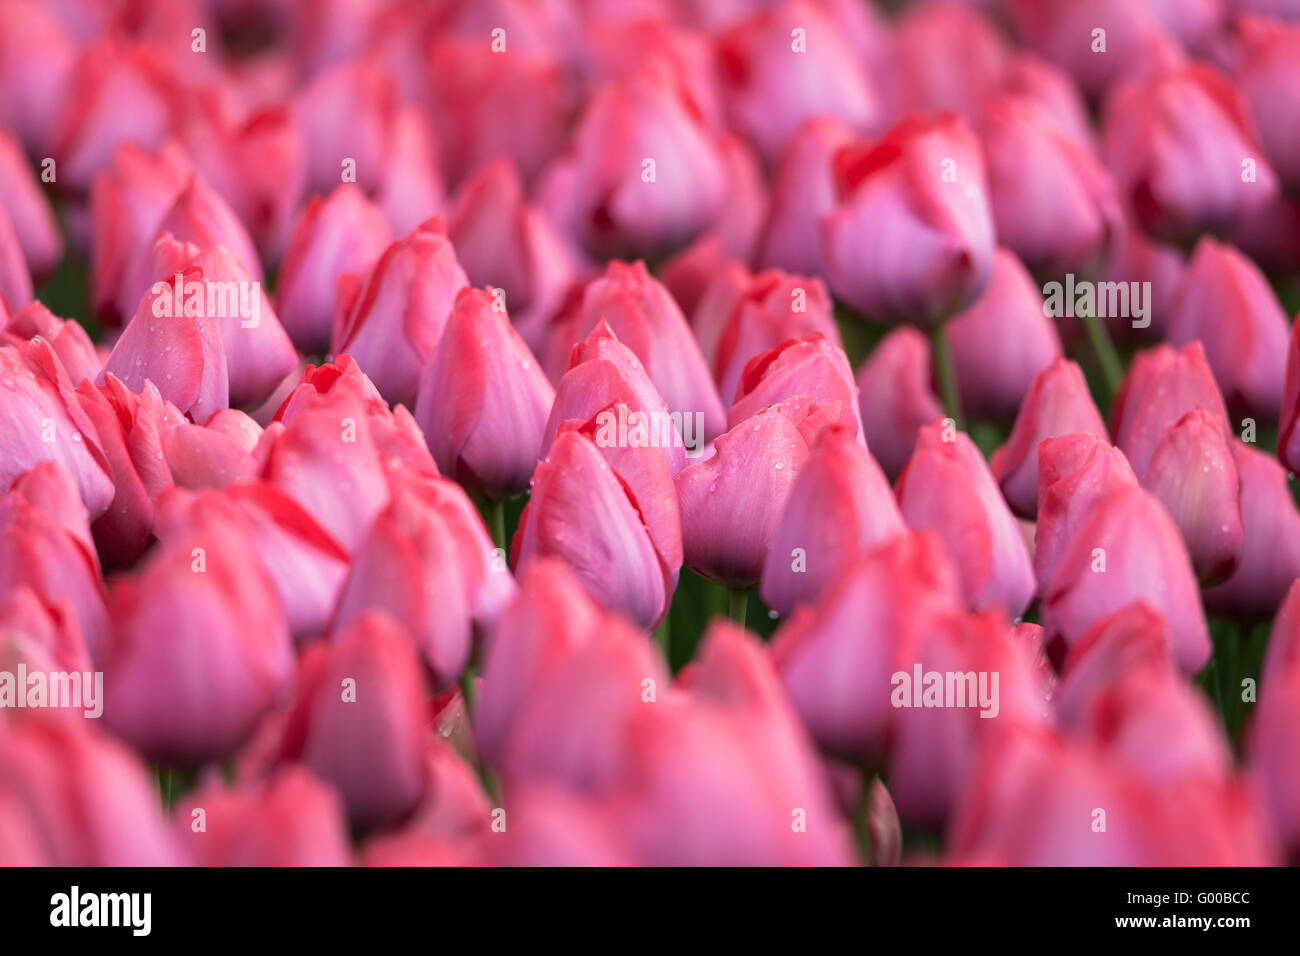 Tulip. Beautiful colorful pink tulips flowers in spring garden, vibrant floral background Stock Photo